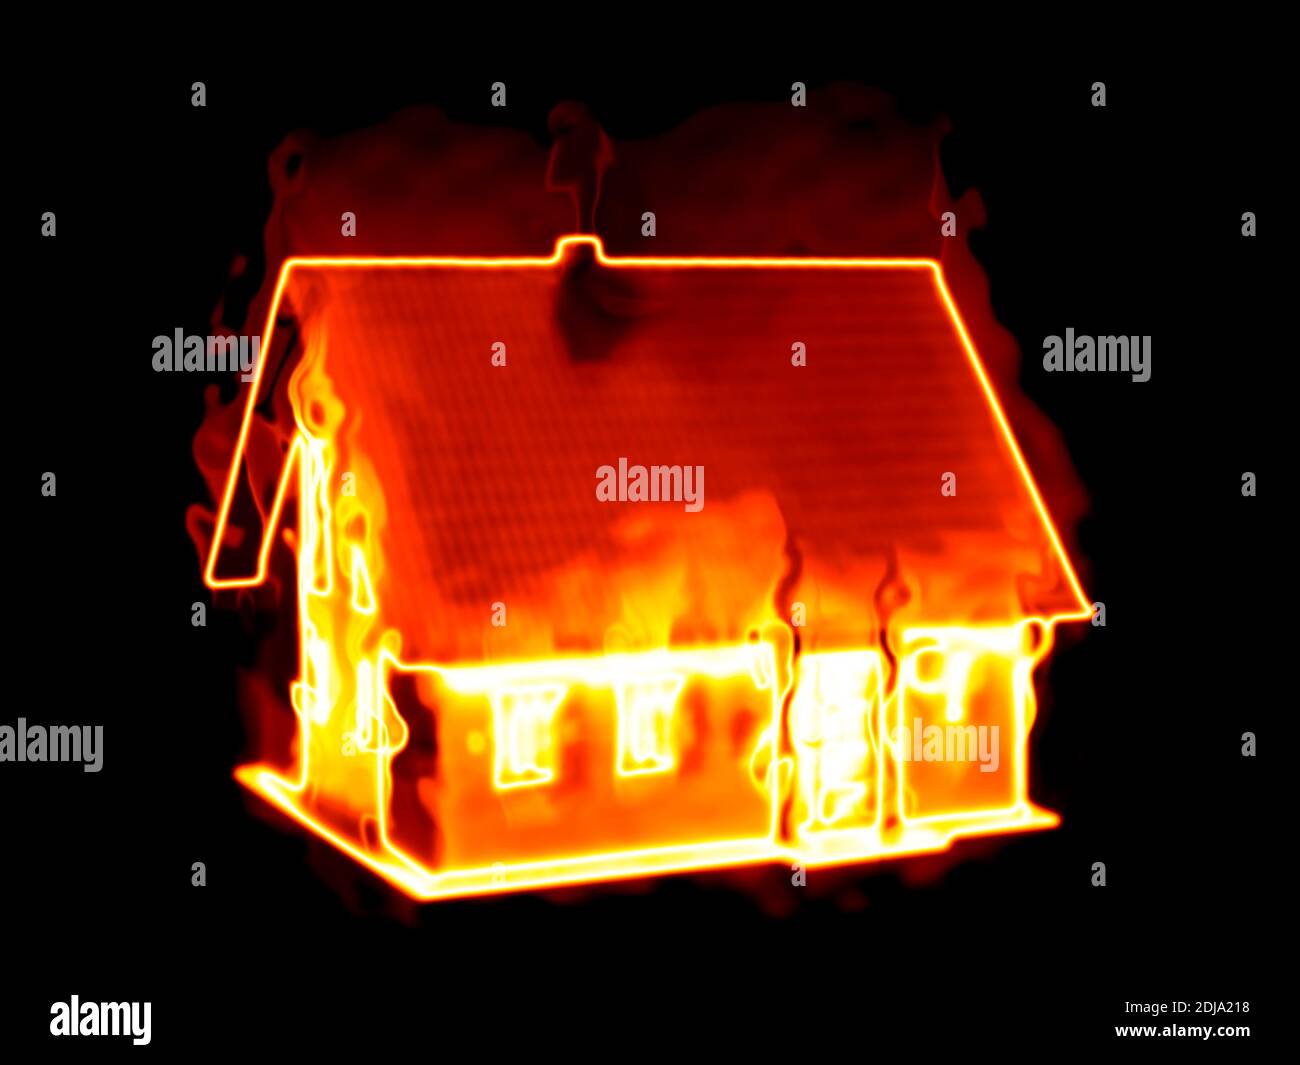 An illustration of a house on fire Stock Photo